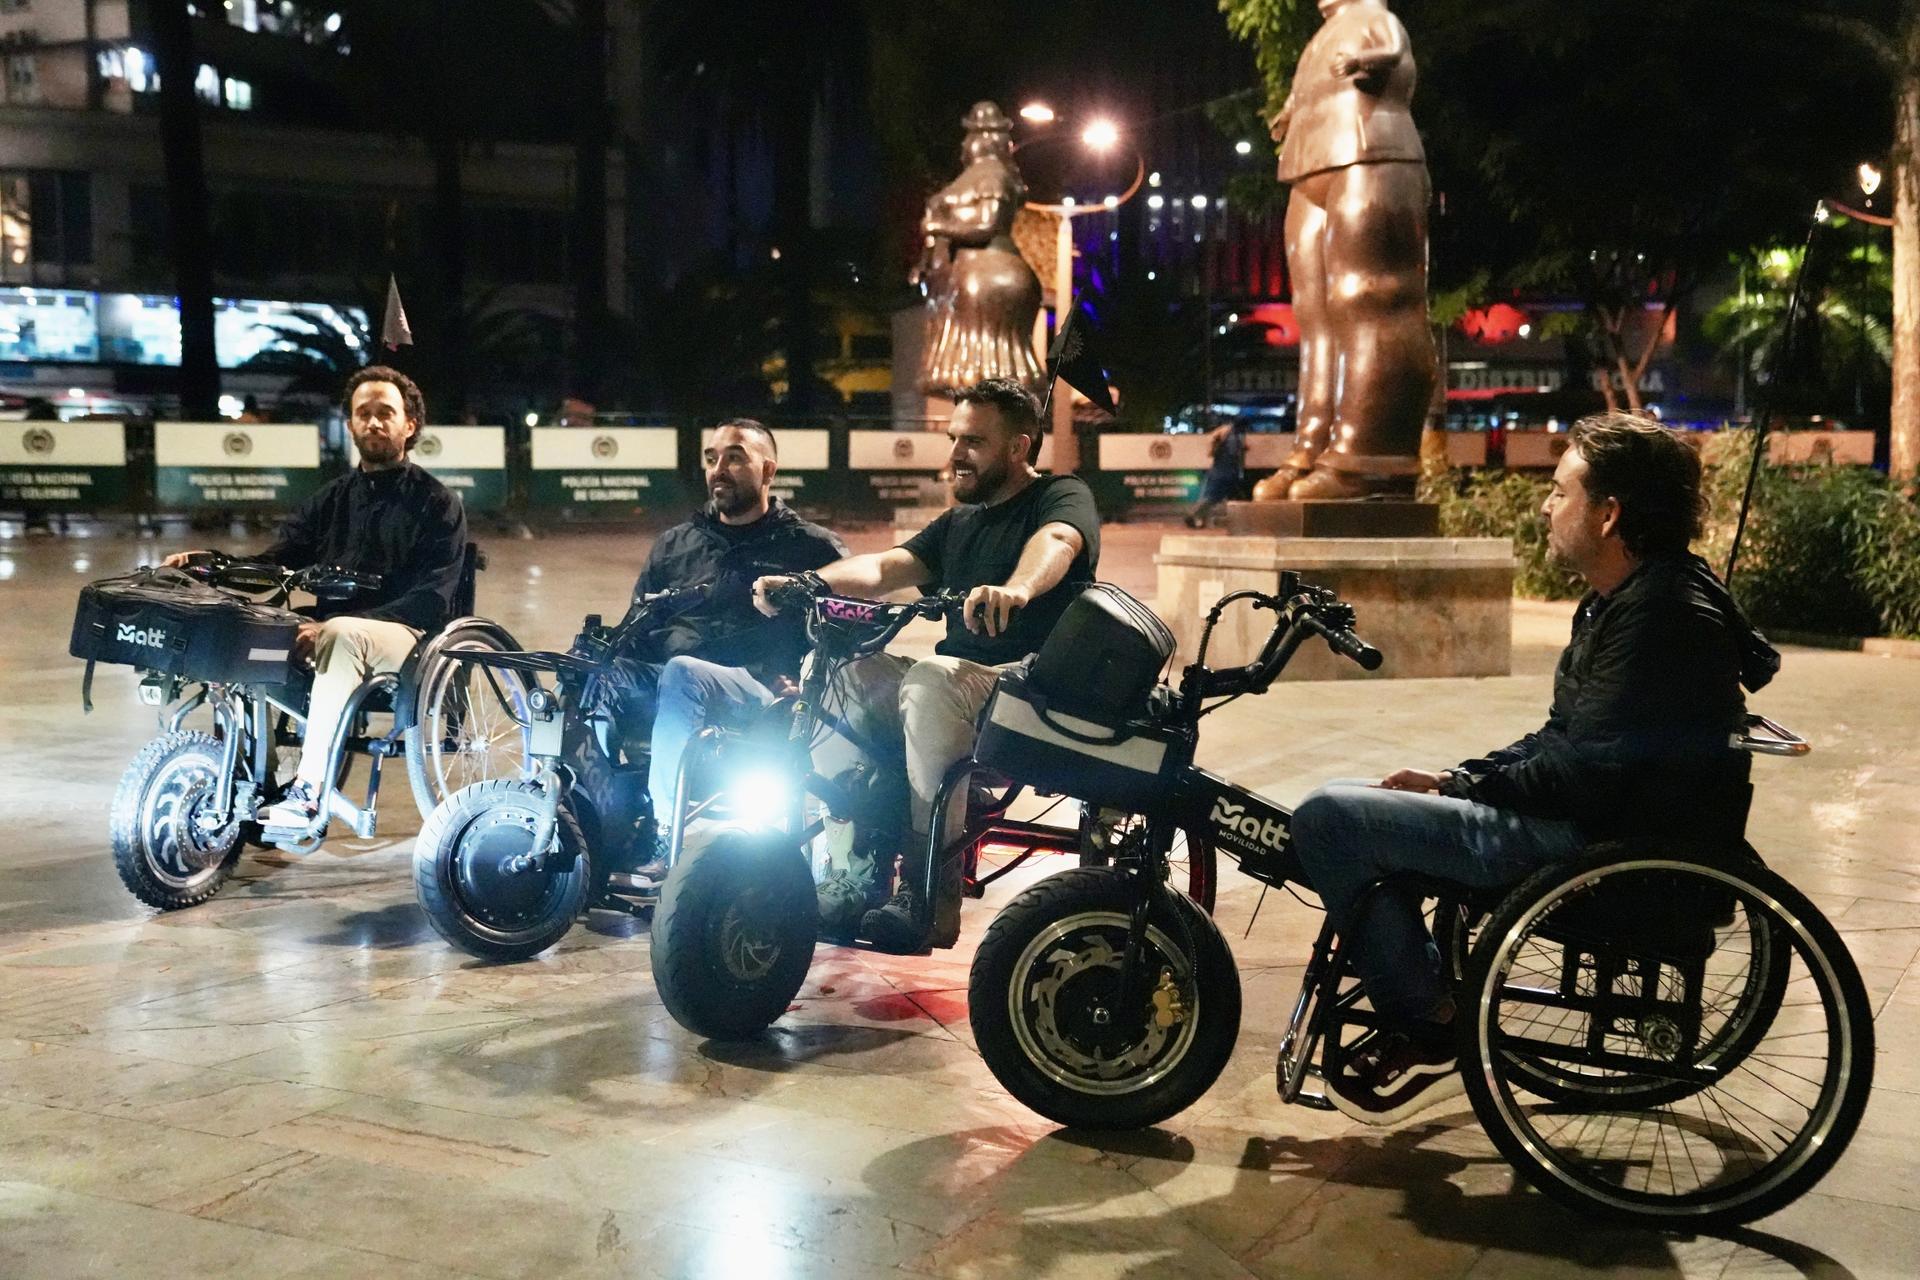 A group of people sitting on electric wheelchairs at night